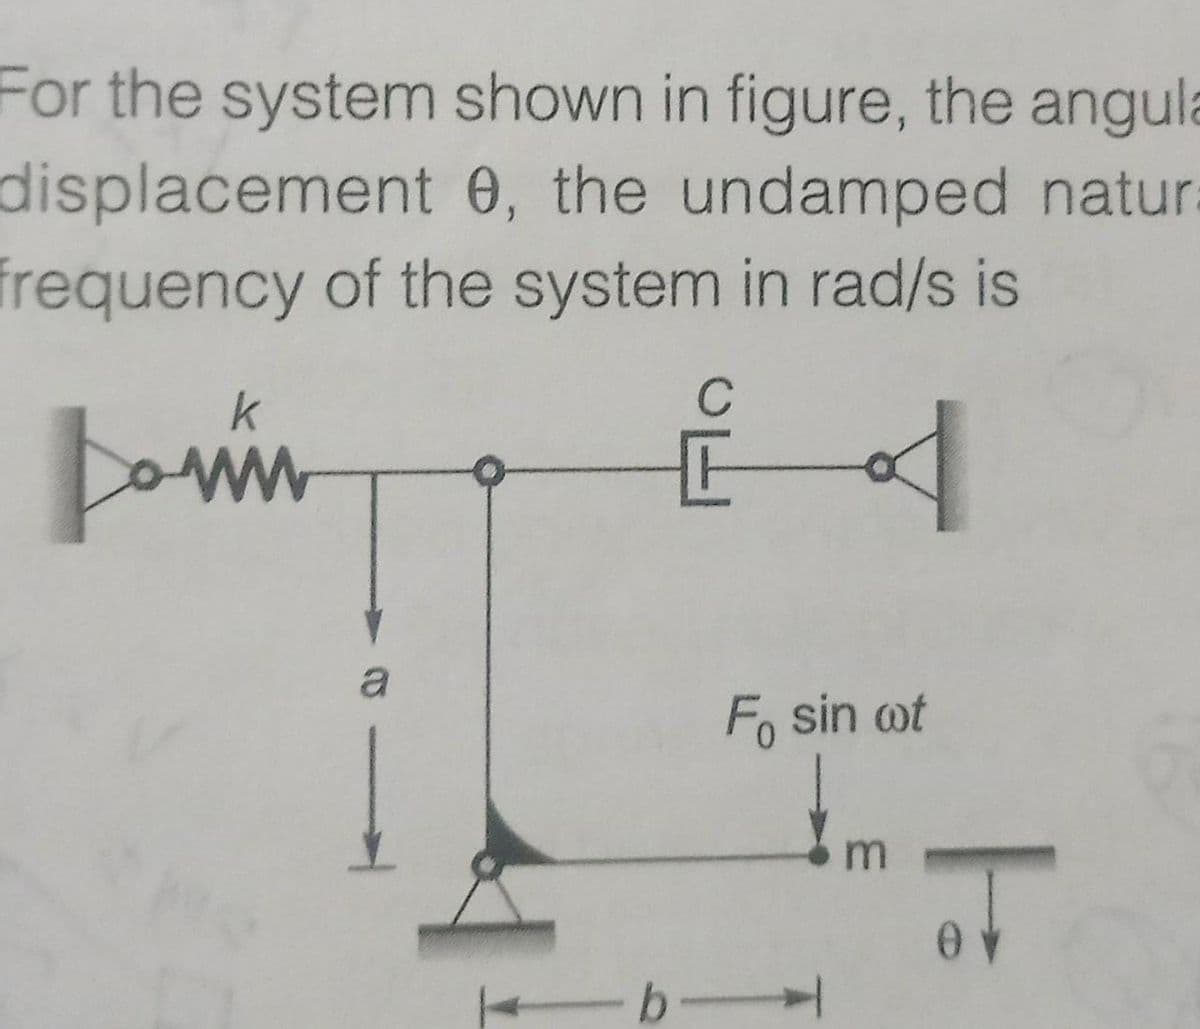 For the system shown in figure, the angula
displacement 0, the undamped natur
frequency of the system in rad/s is
k
C
a
Fo sin ot
m
b-
